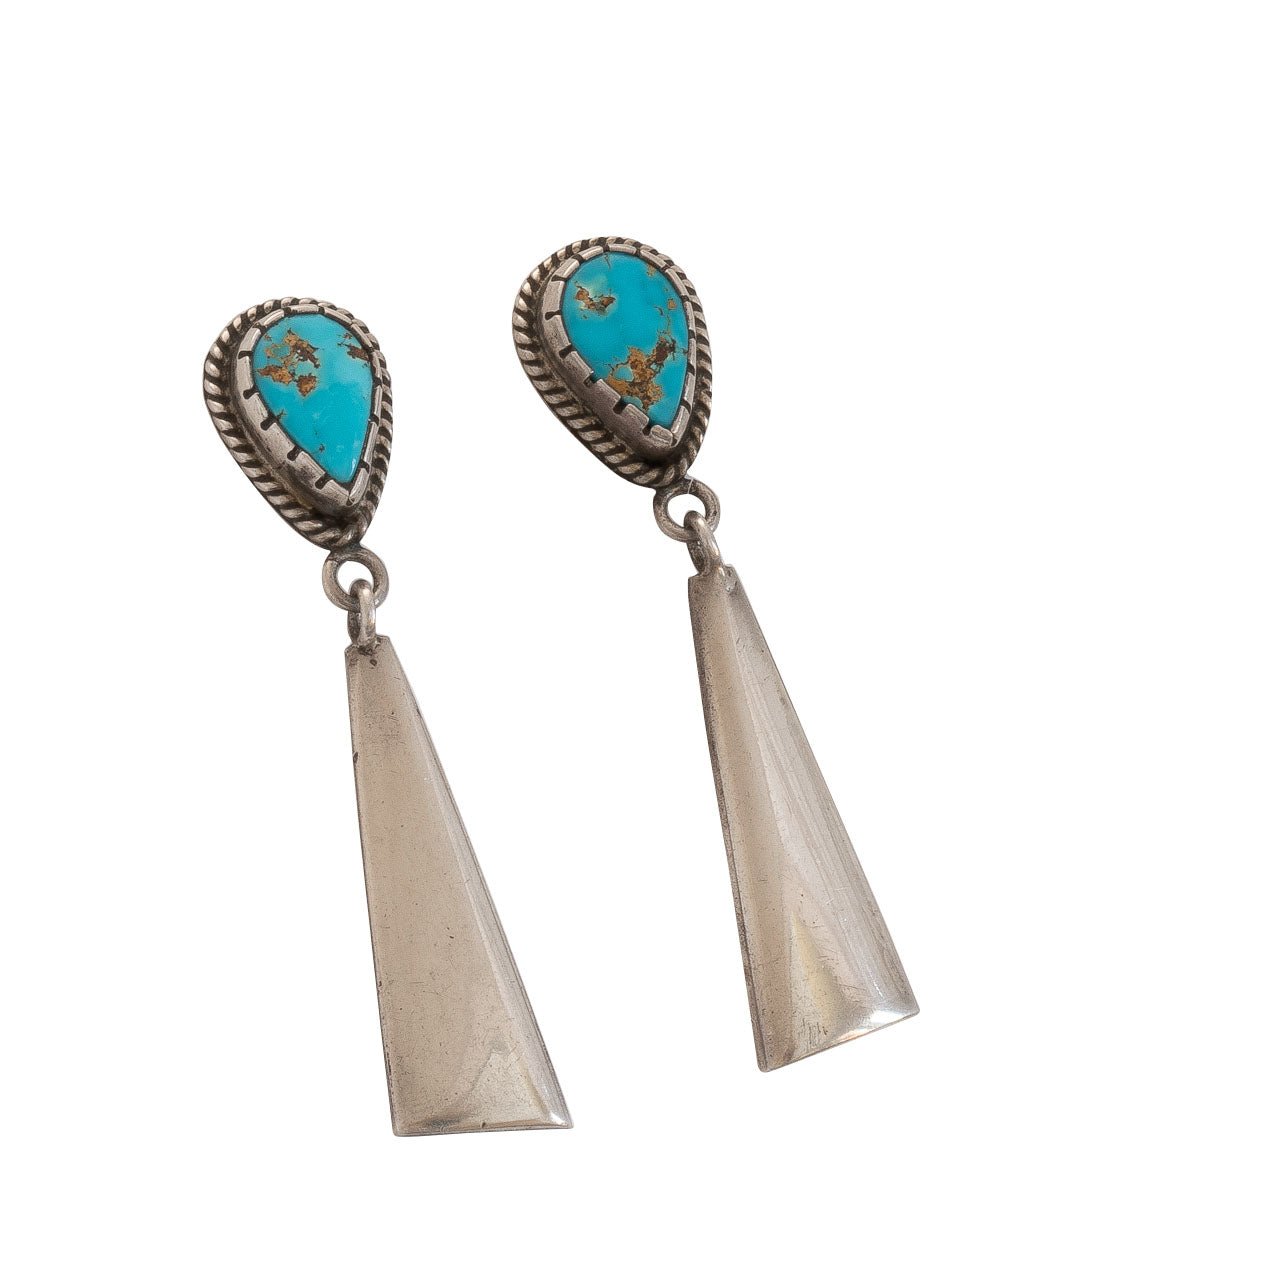 Vintage Turquoise Dangle Earrings by Mitchell Calabaza - Turquoise & Tufa